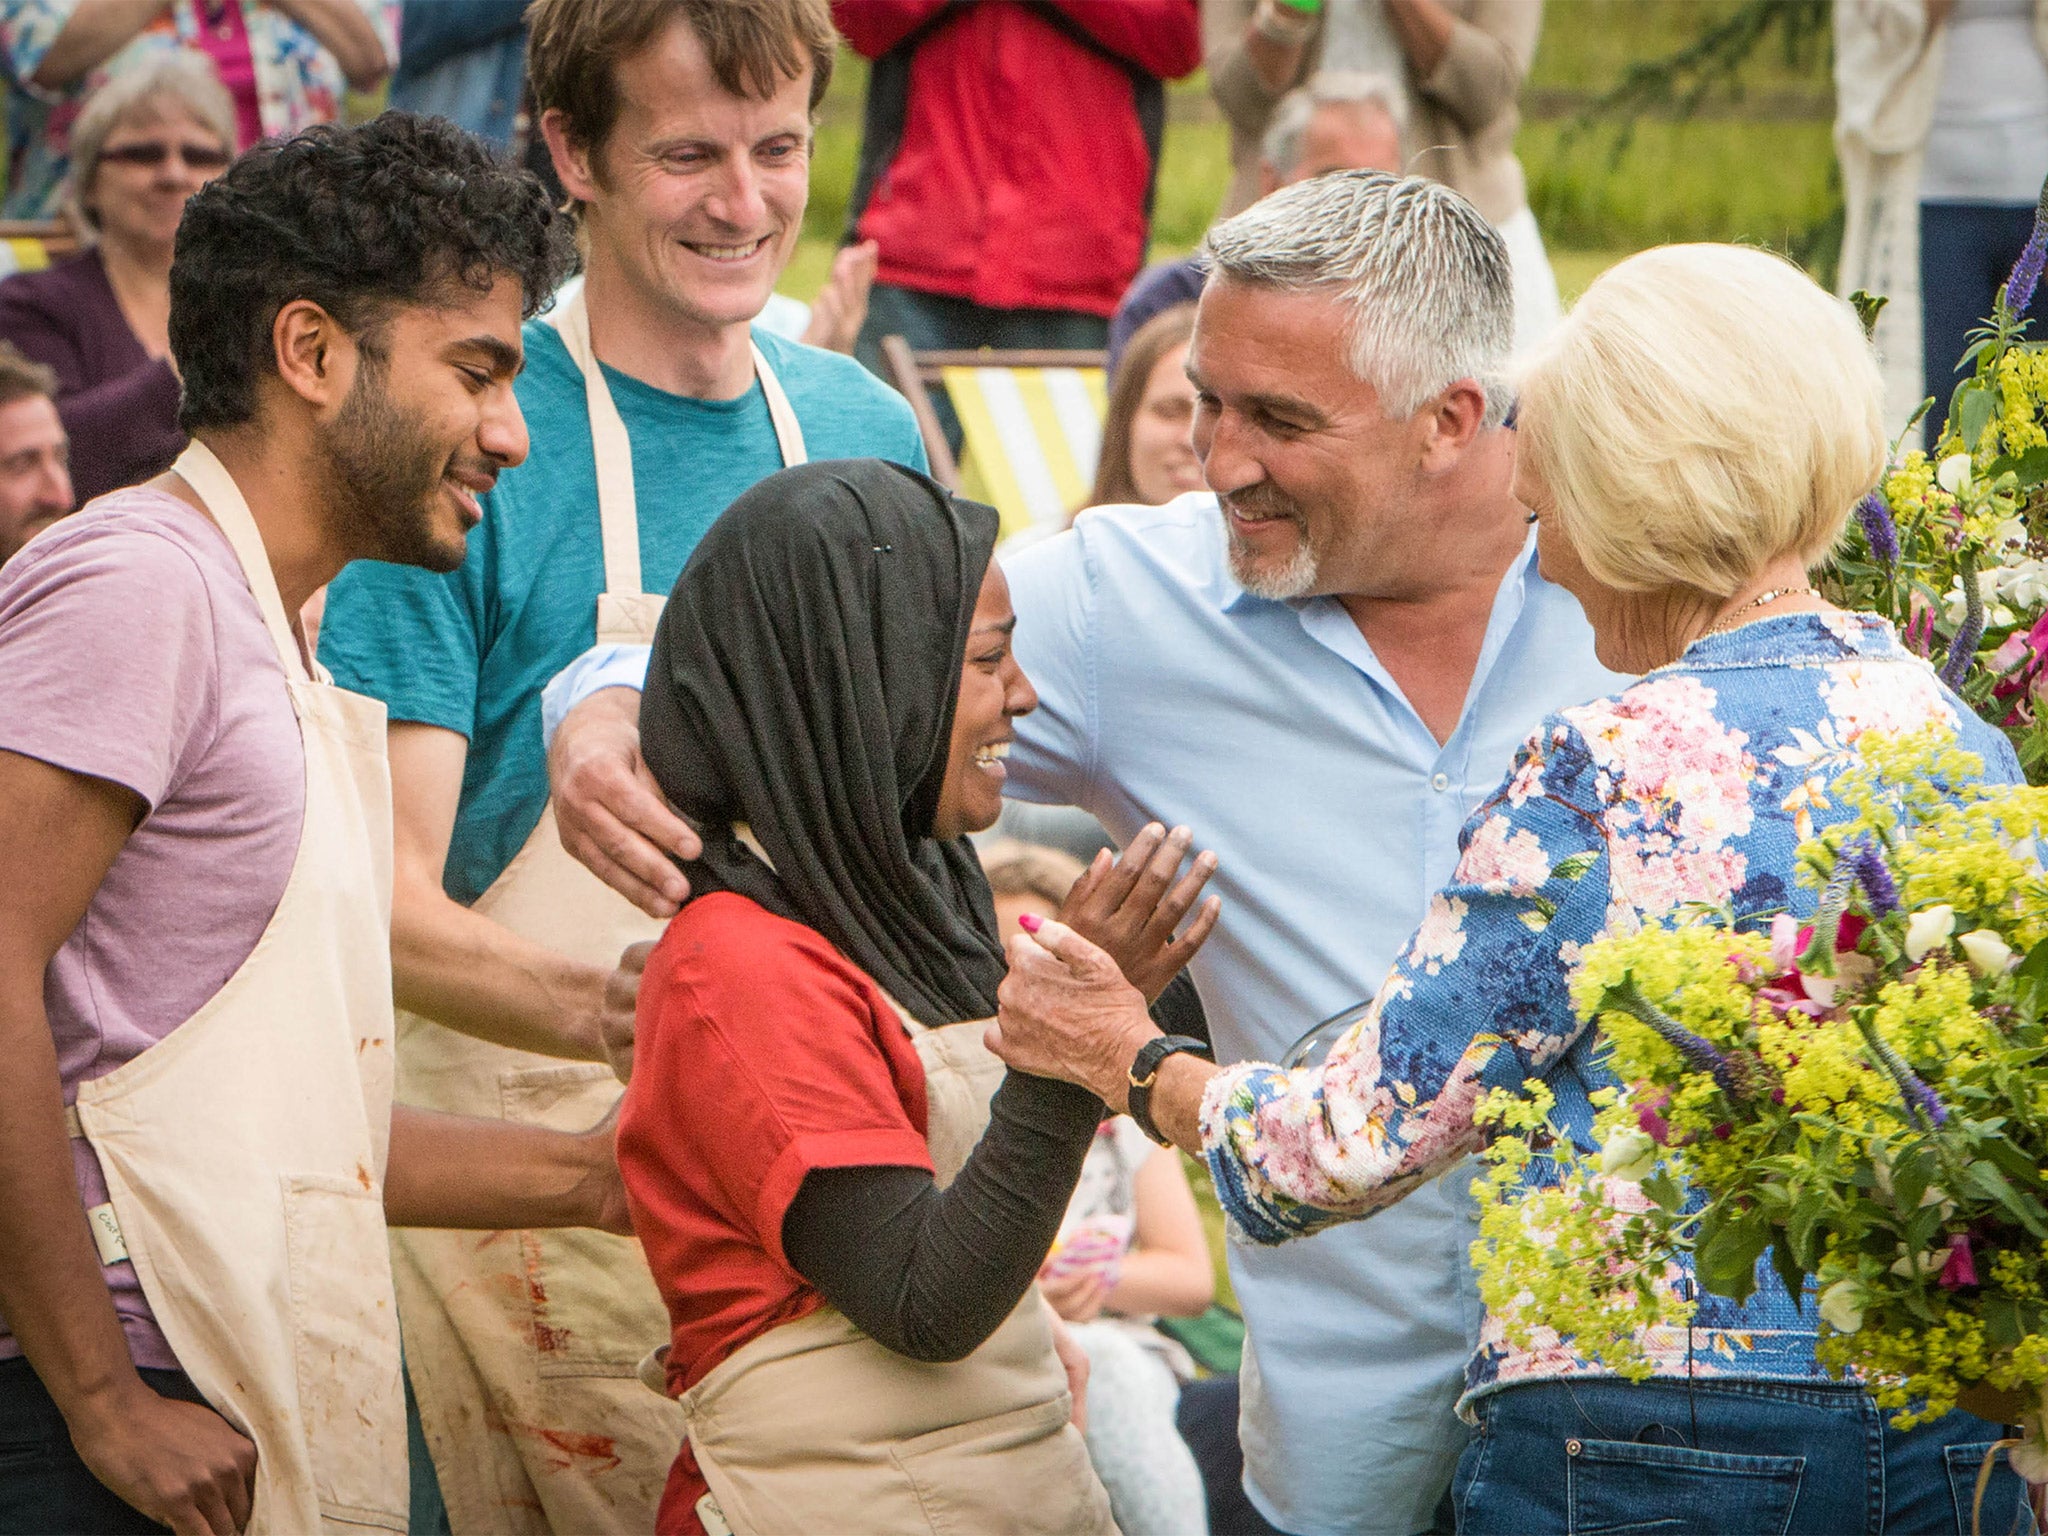 Nadiya has a moment with Paul Hollywood and Mary Berry; Ian and Tamal look on